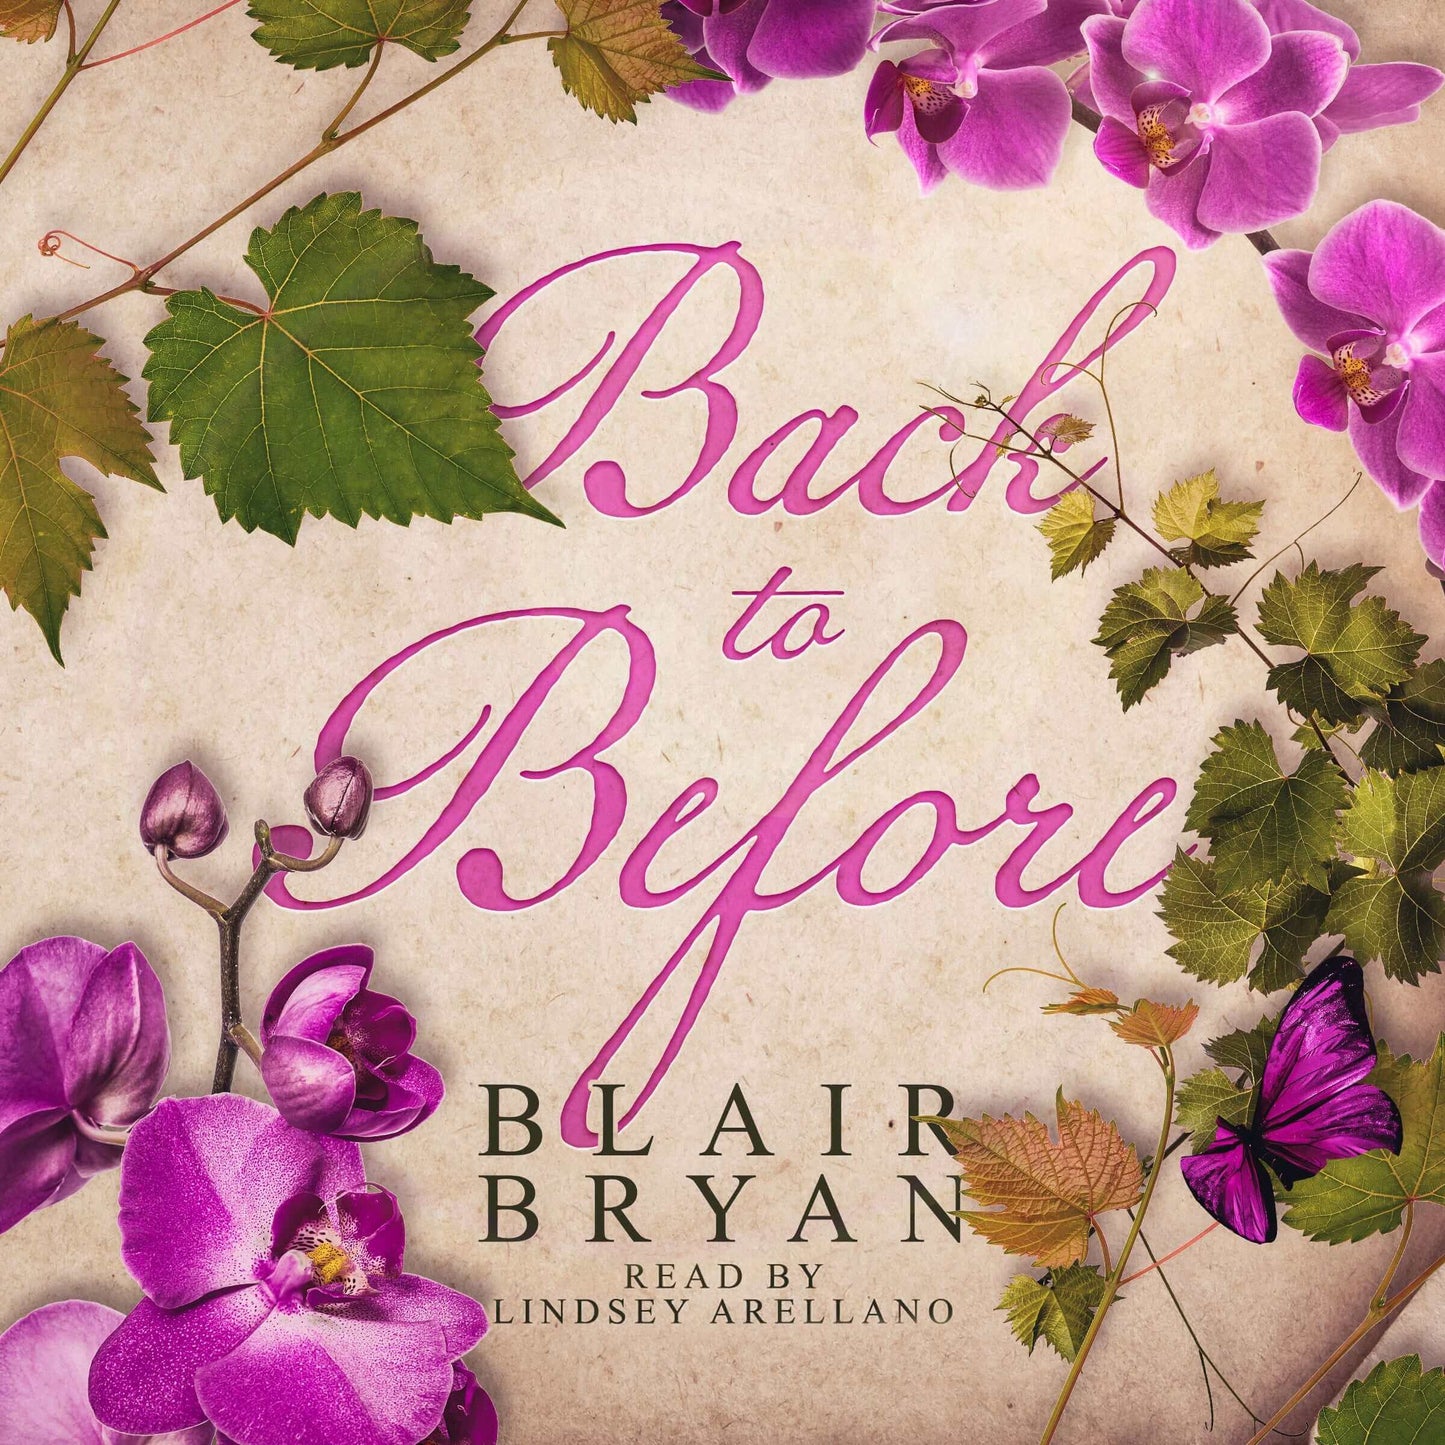 Back to Before (Book 1 of 2 of the Simon Family Series) Audiobook